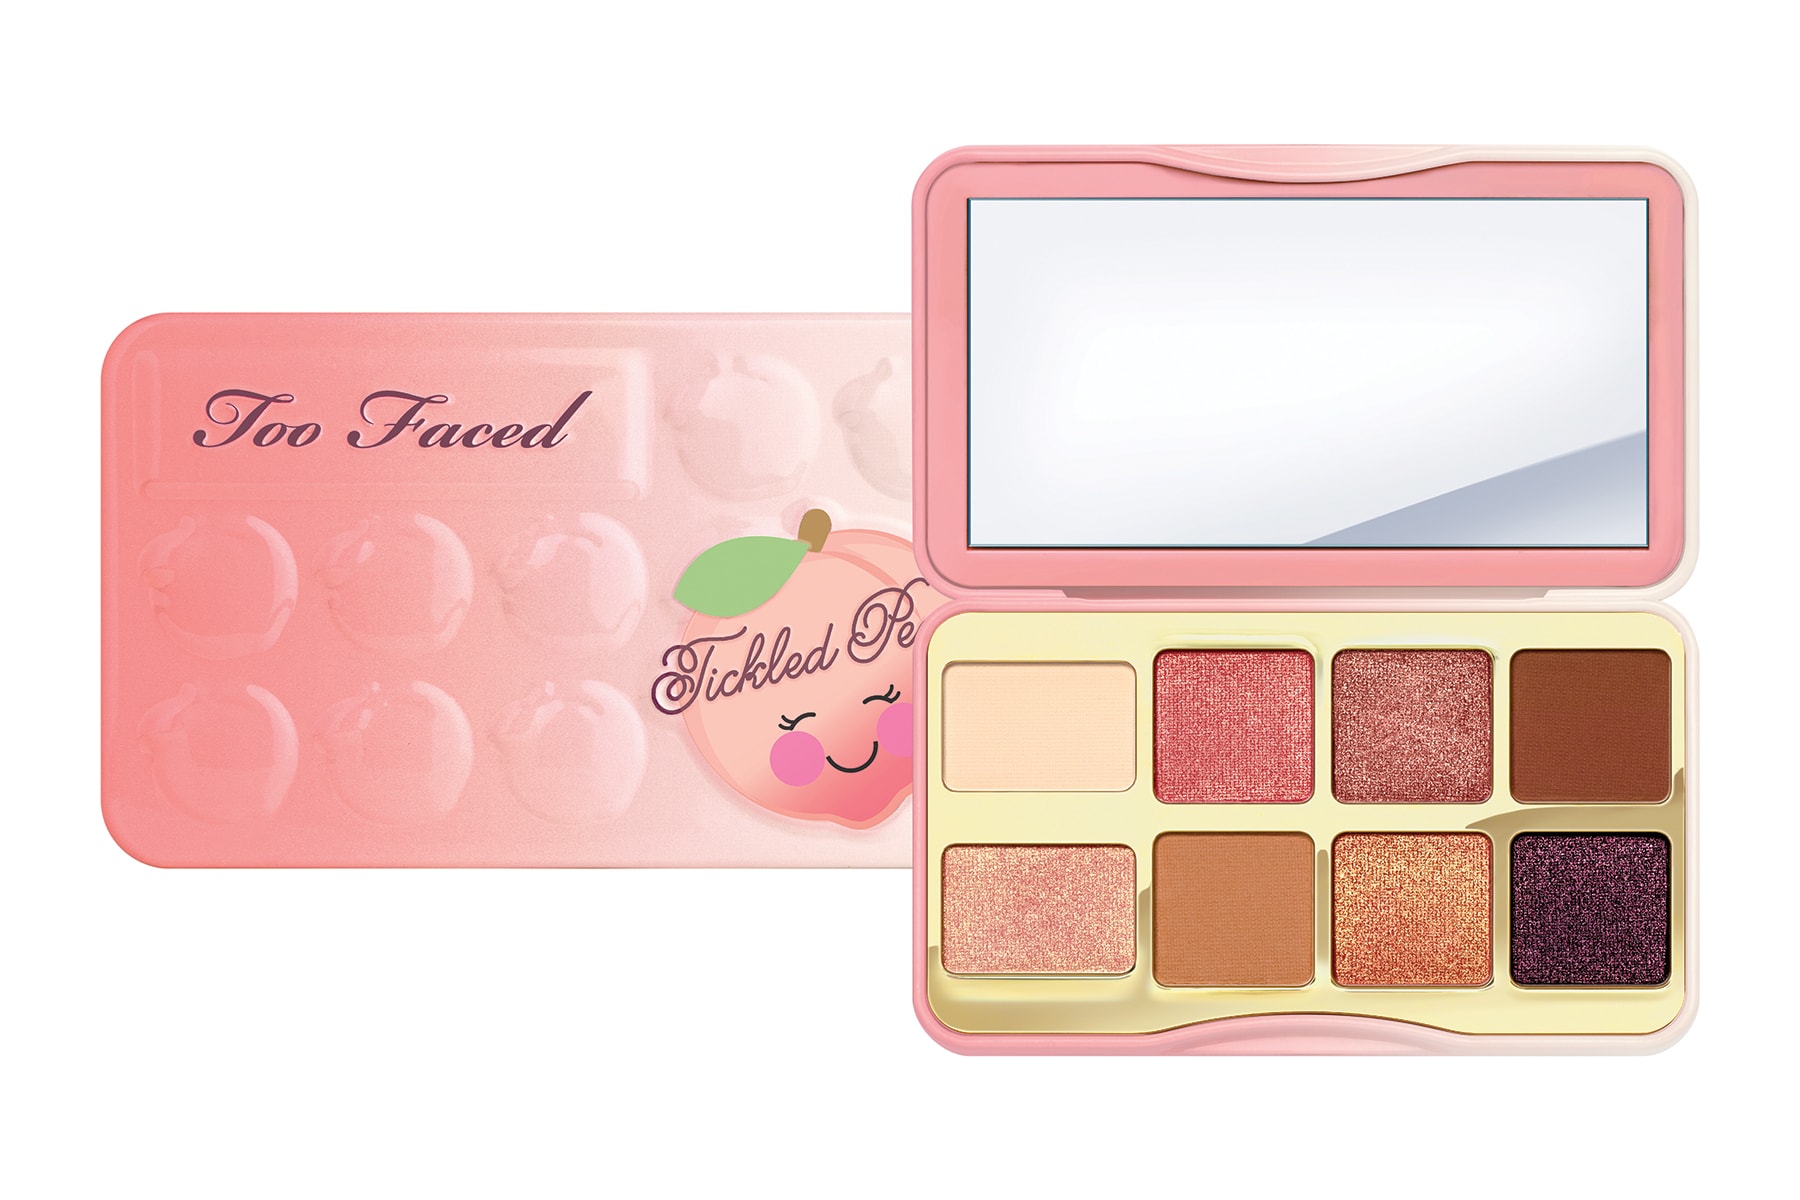 Too Faced Bite-Sized Peach Infused Eyeshadow Palette